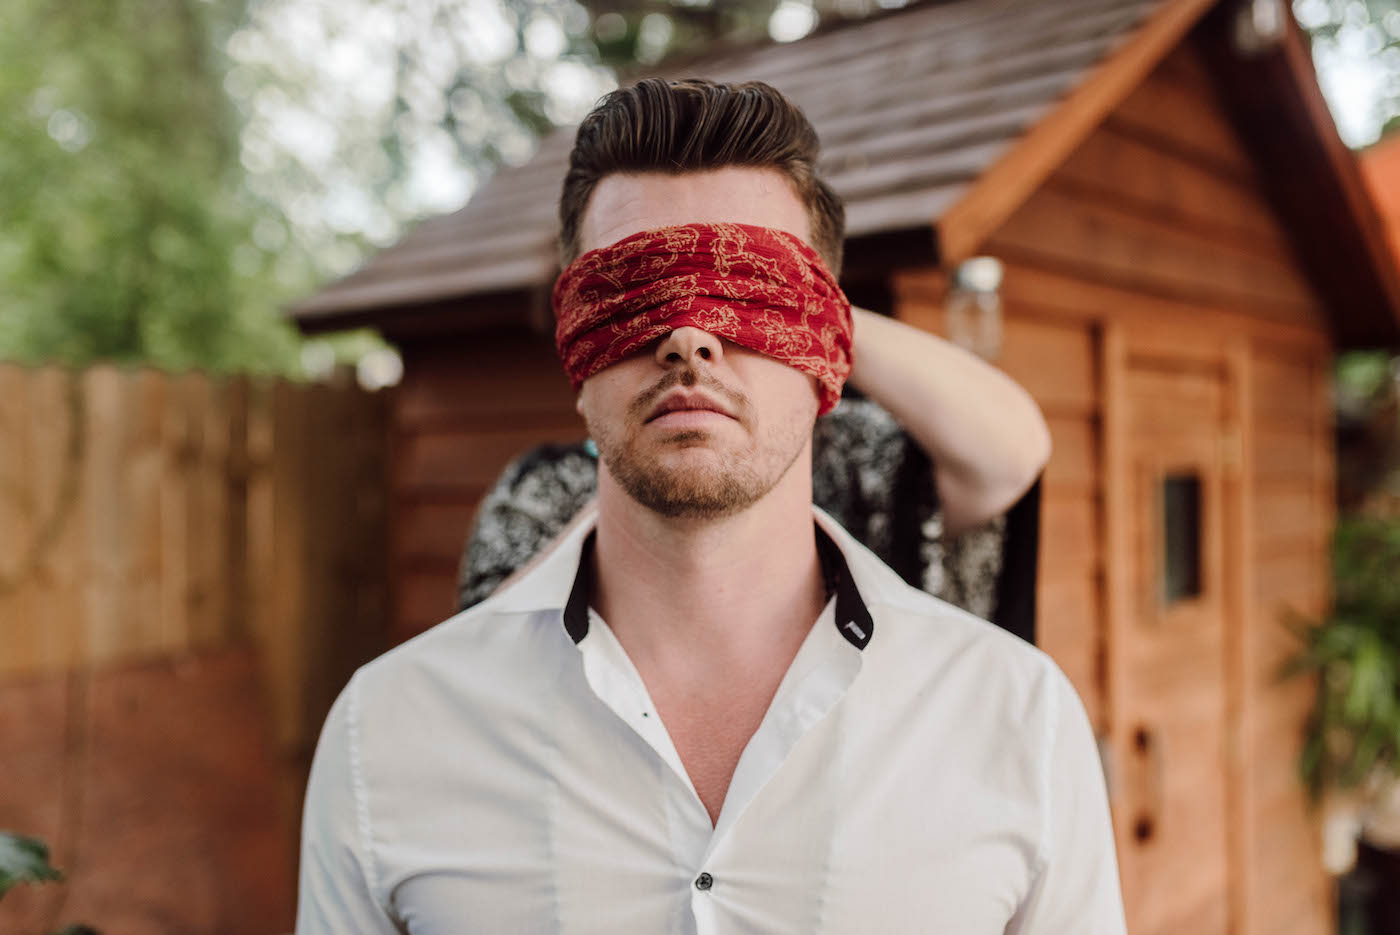 COVID Wedding Elopement Ceremony with Blindfold Groom for Bride and Groom First Look Touch